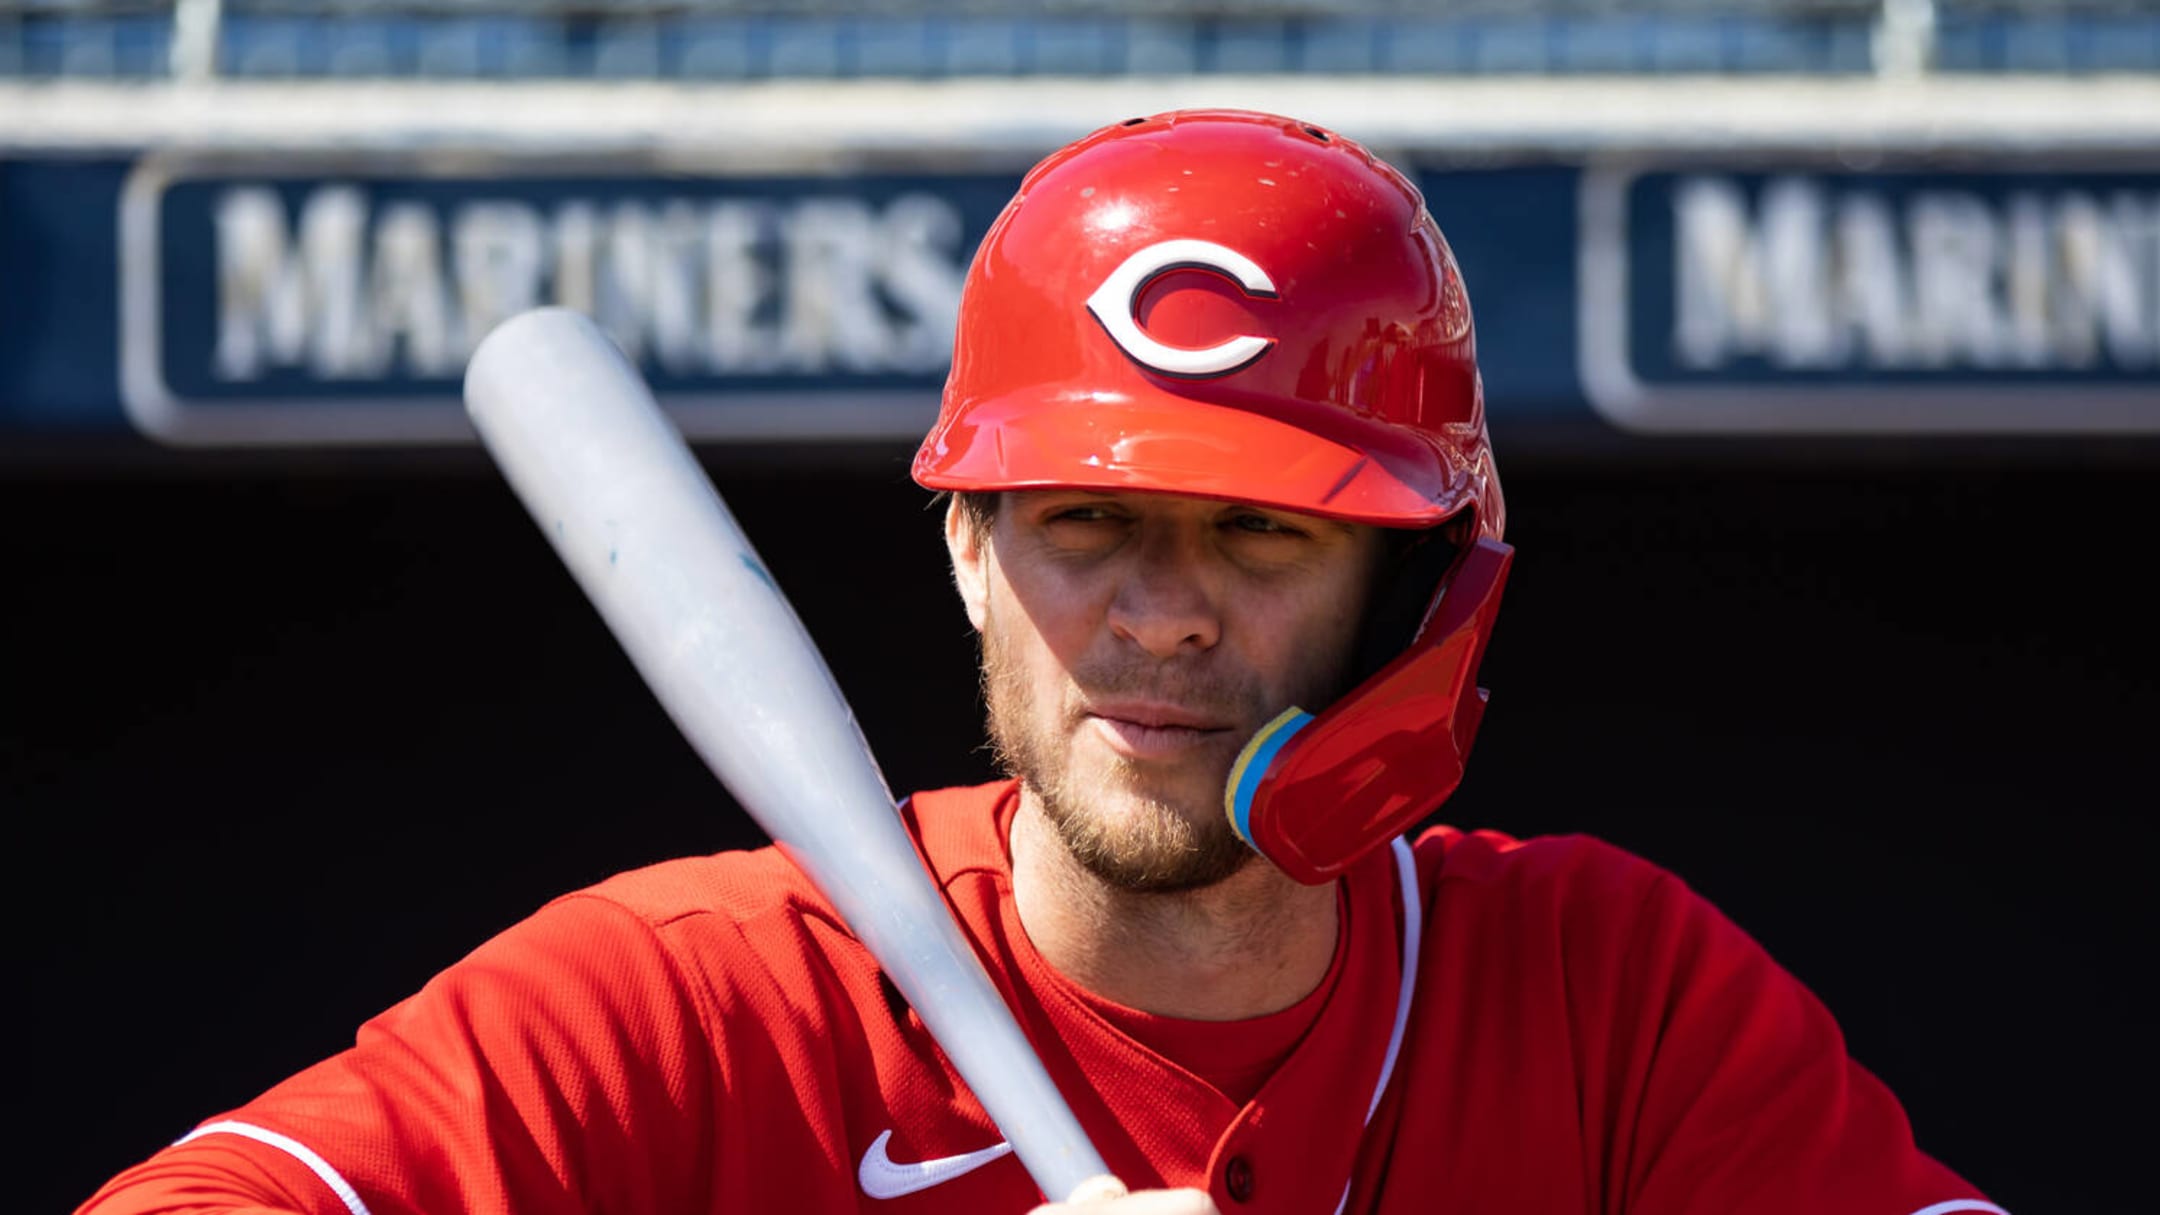 Evaluating the Reds right field options for the 2022 season